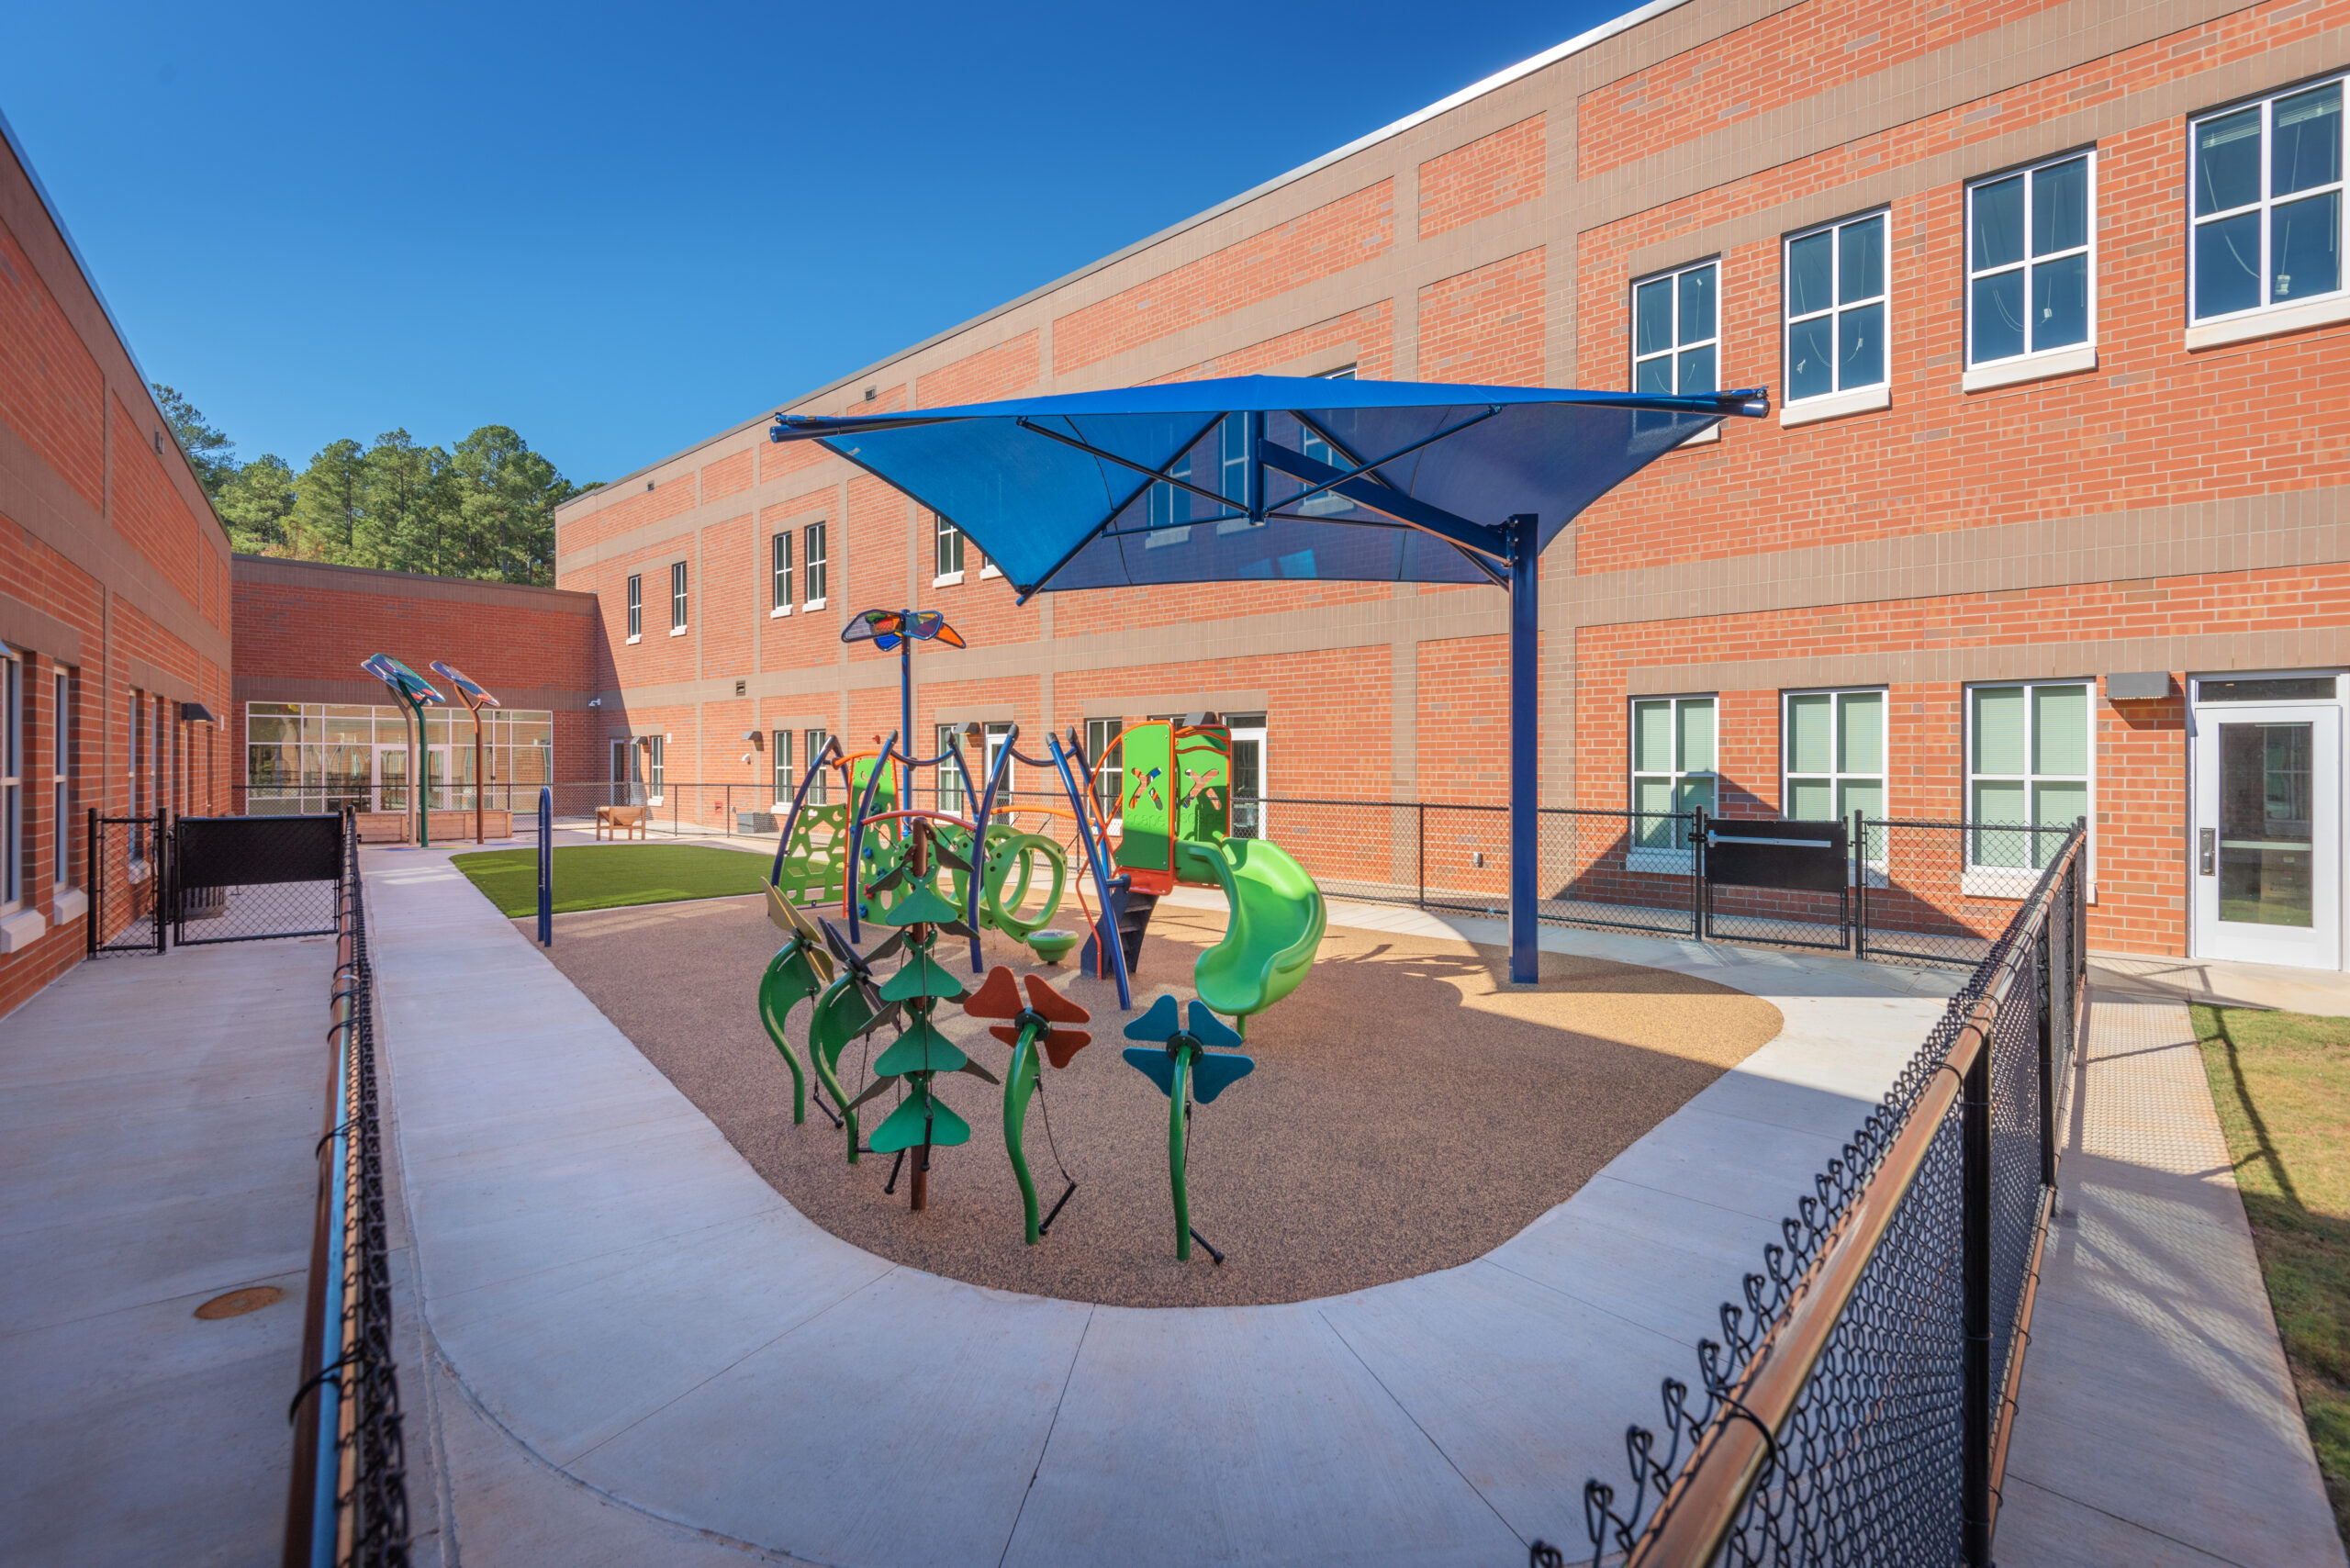 Barton Pond Elementary School Small Playground with Canopy and Green Play Equipment